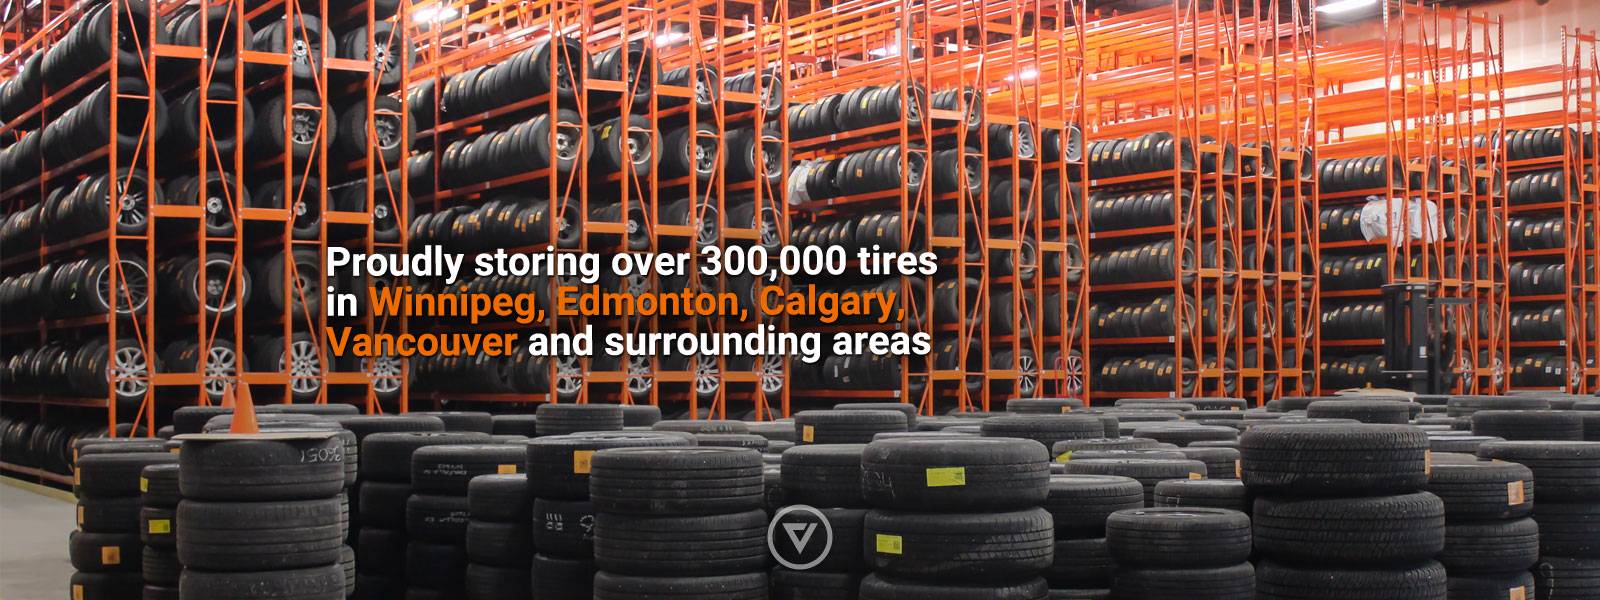 Proudly storing over 350,000 tires in Winnipeg, Edmonton, Calgary, Vancouver and surrounding areas